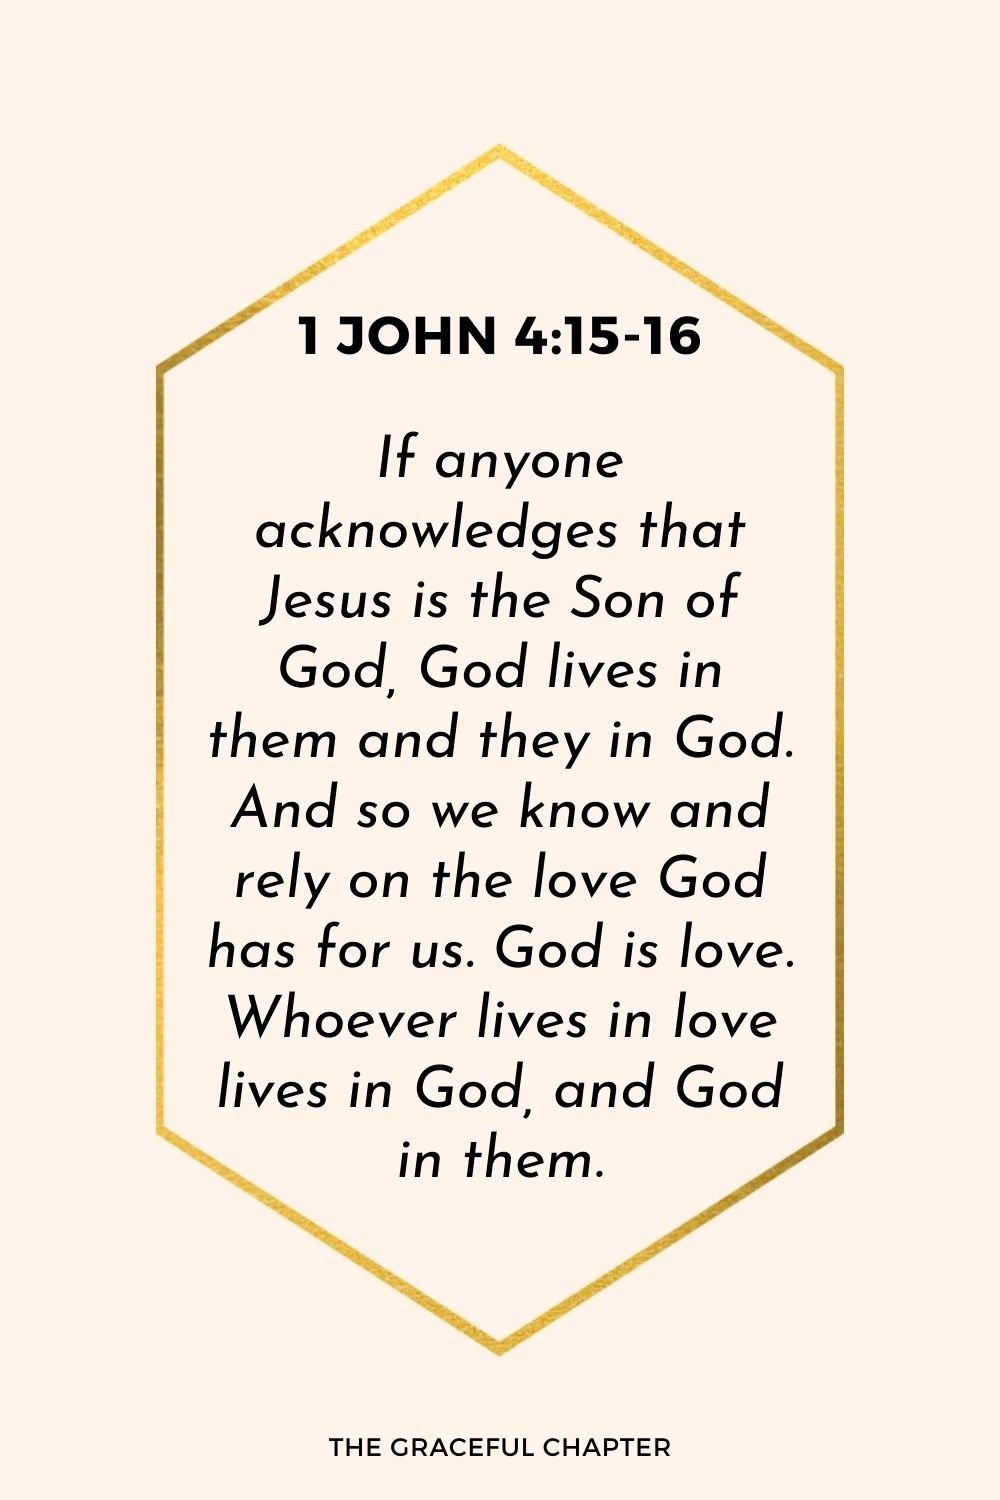 If anyone acknowledges that Jesus is the Son of God, God lives in them and they in God. And so we know and rely on the love God has for us. God is love. Whoever lives in love lives in God, and God in them.